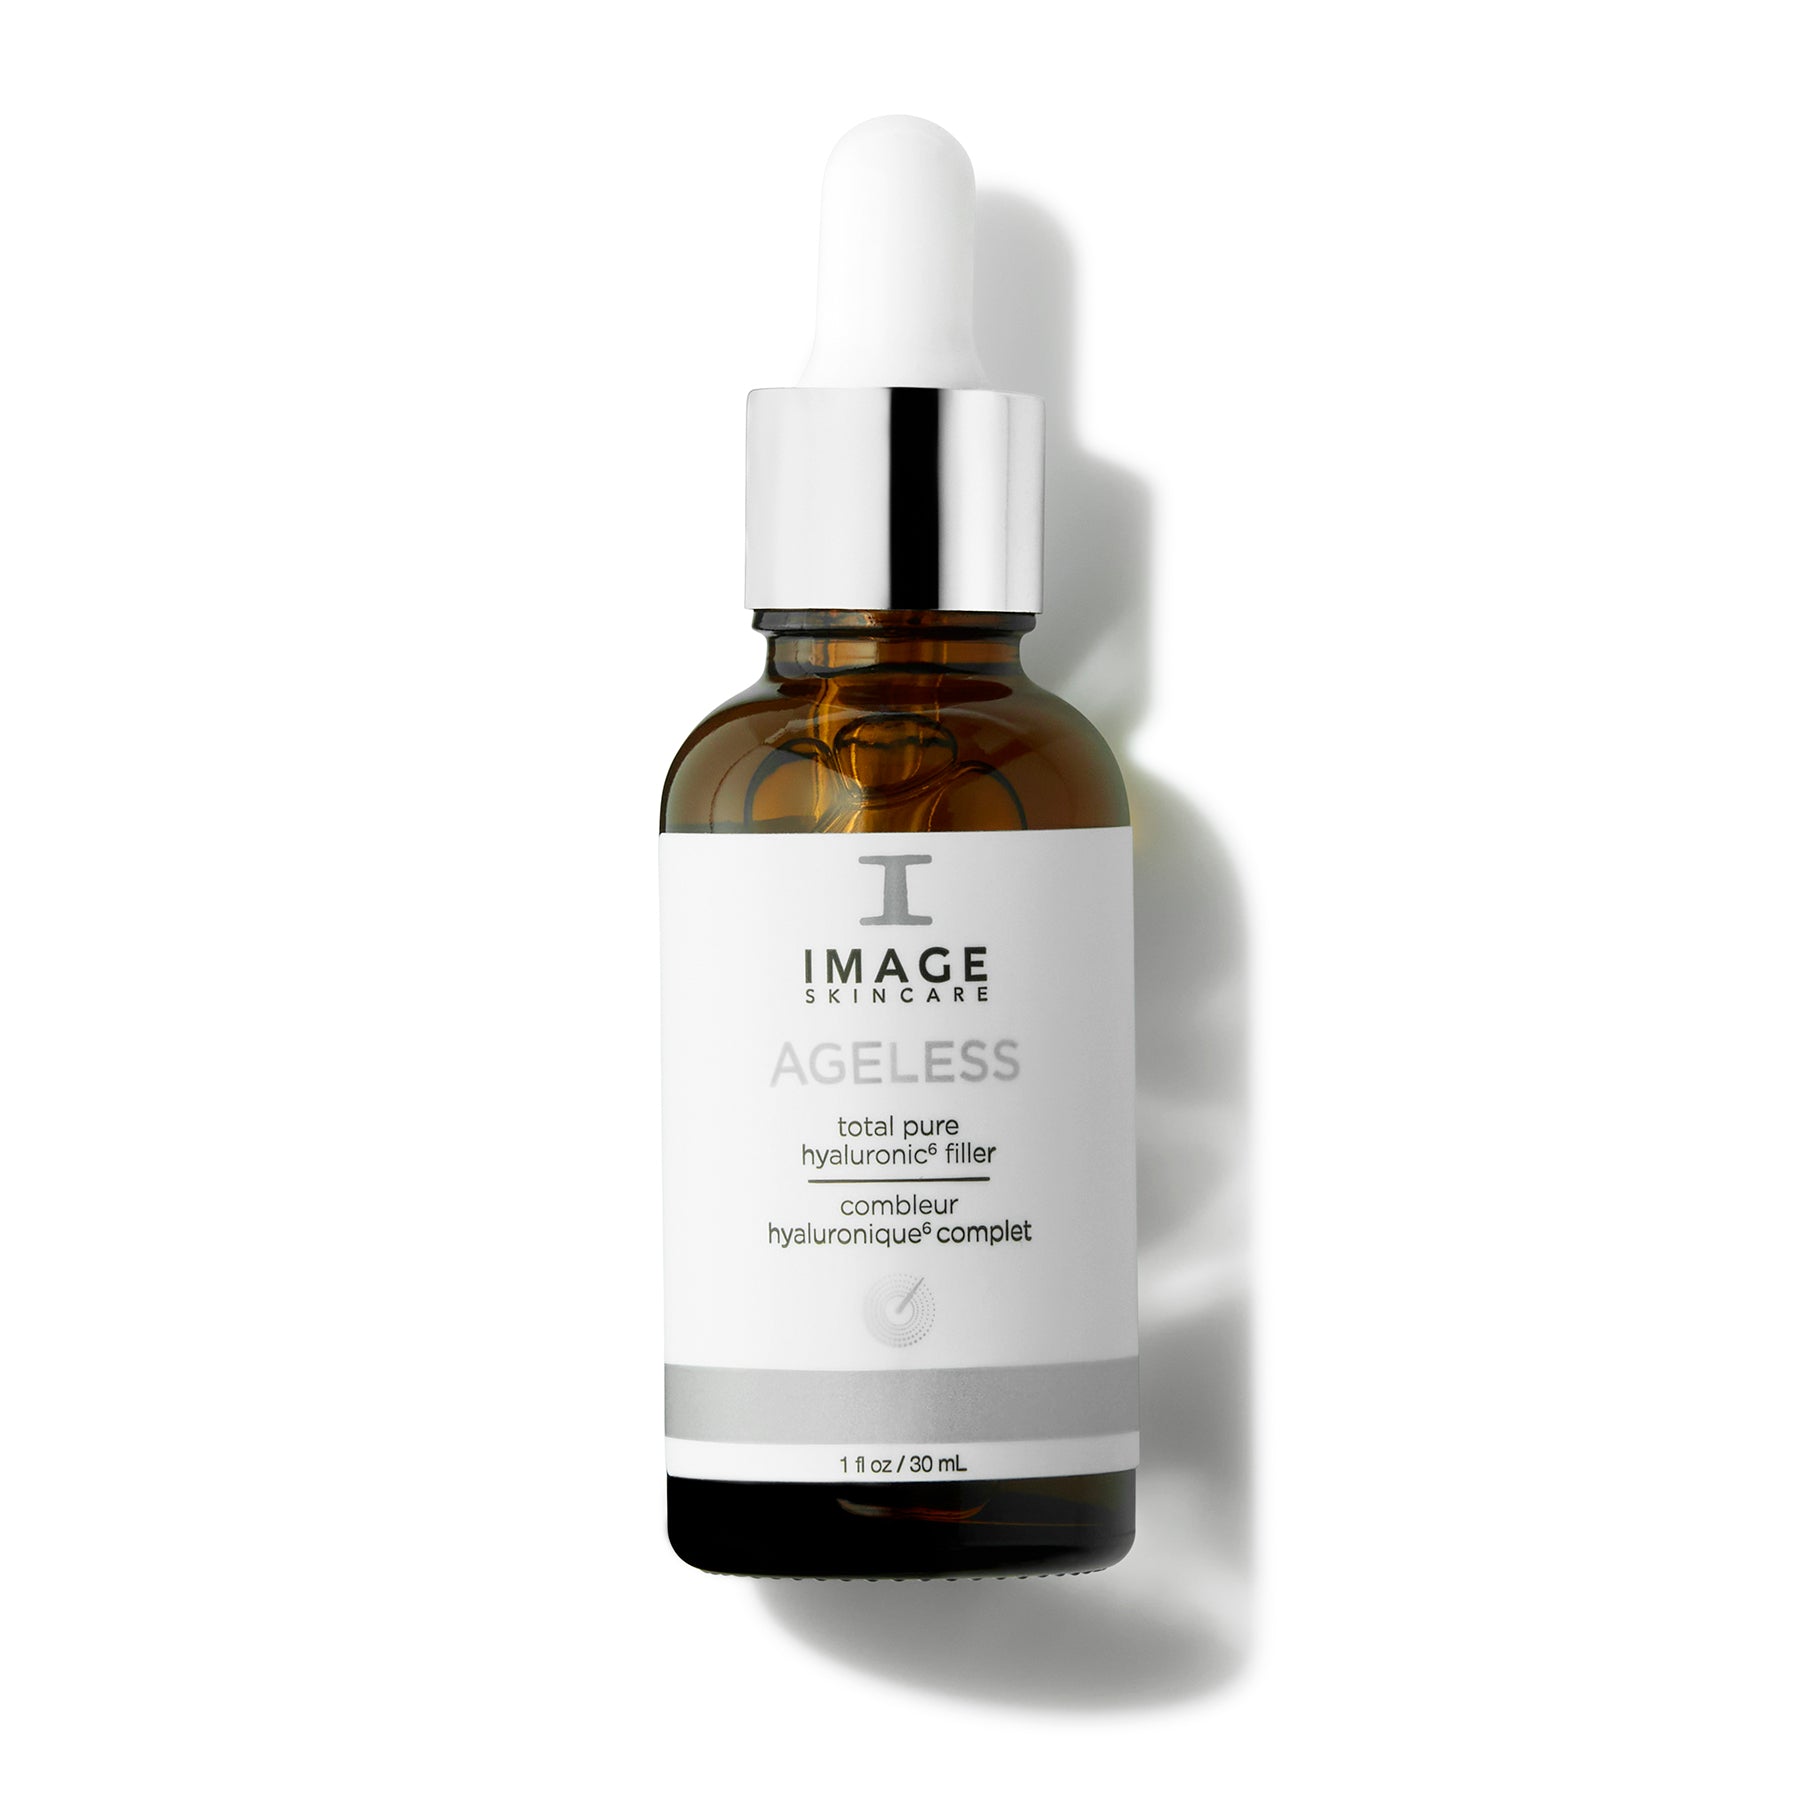 Image Skincare Ageless Total Pure Hyaluronic Filler Shop At Exclusive Beauty